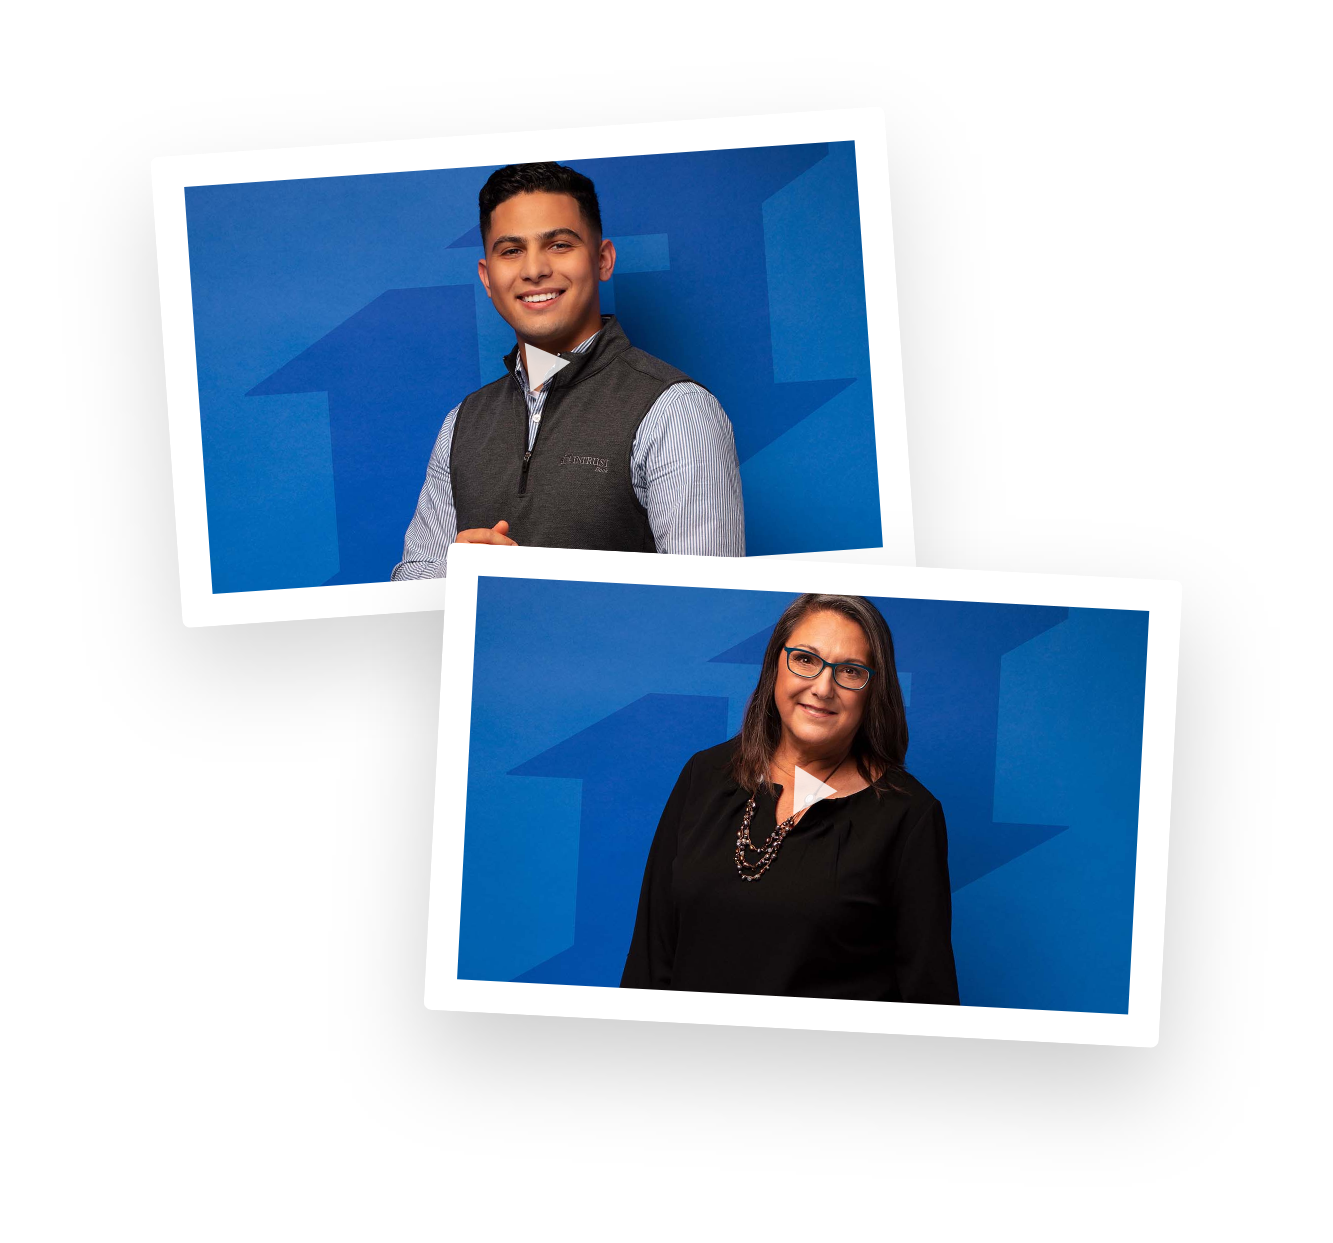 Photo of a man and woman over blue backgrounds